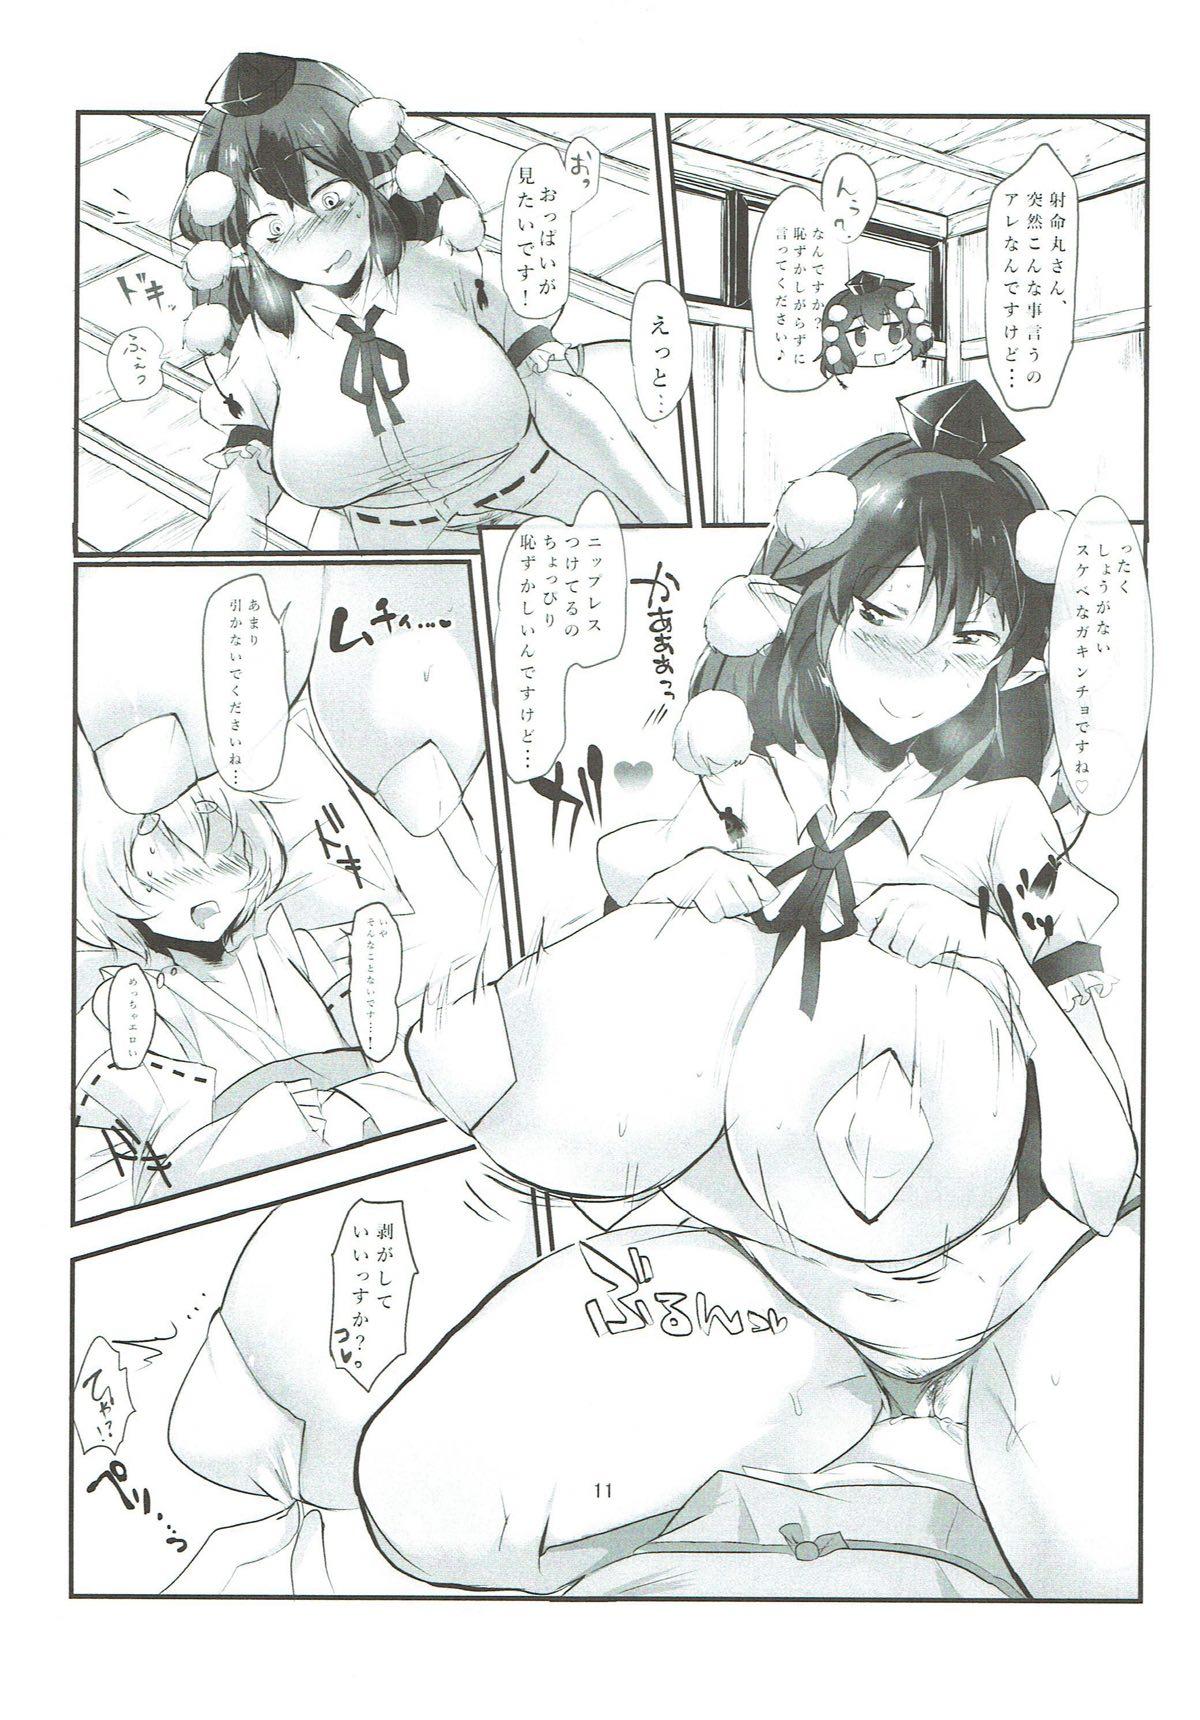 Home あやもみ サンドオーガズム 東方Project - Touhou project Putaria - Page 12